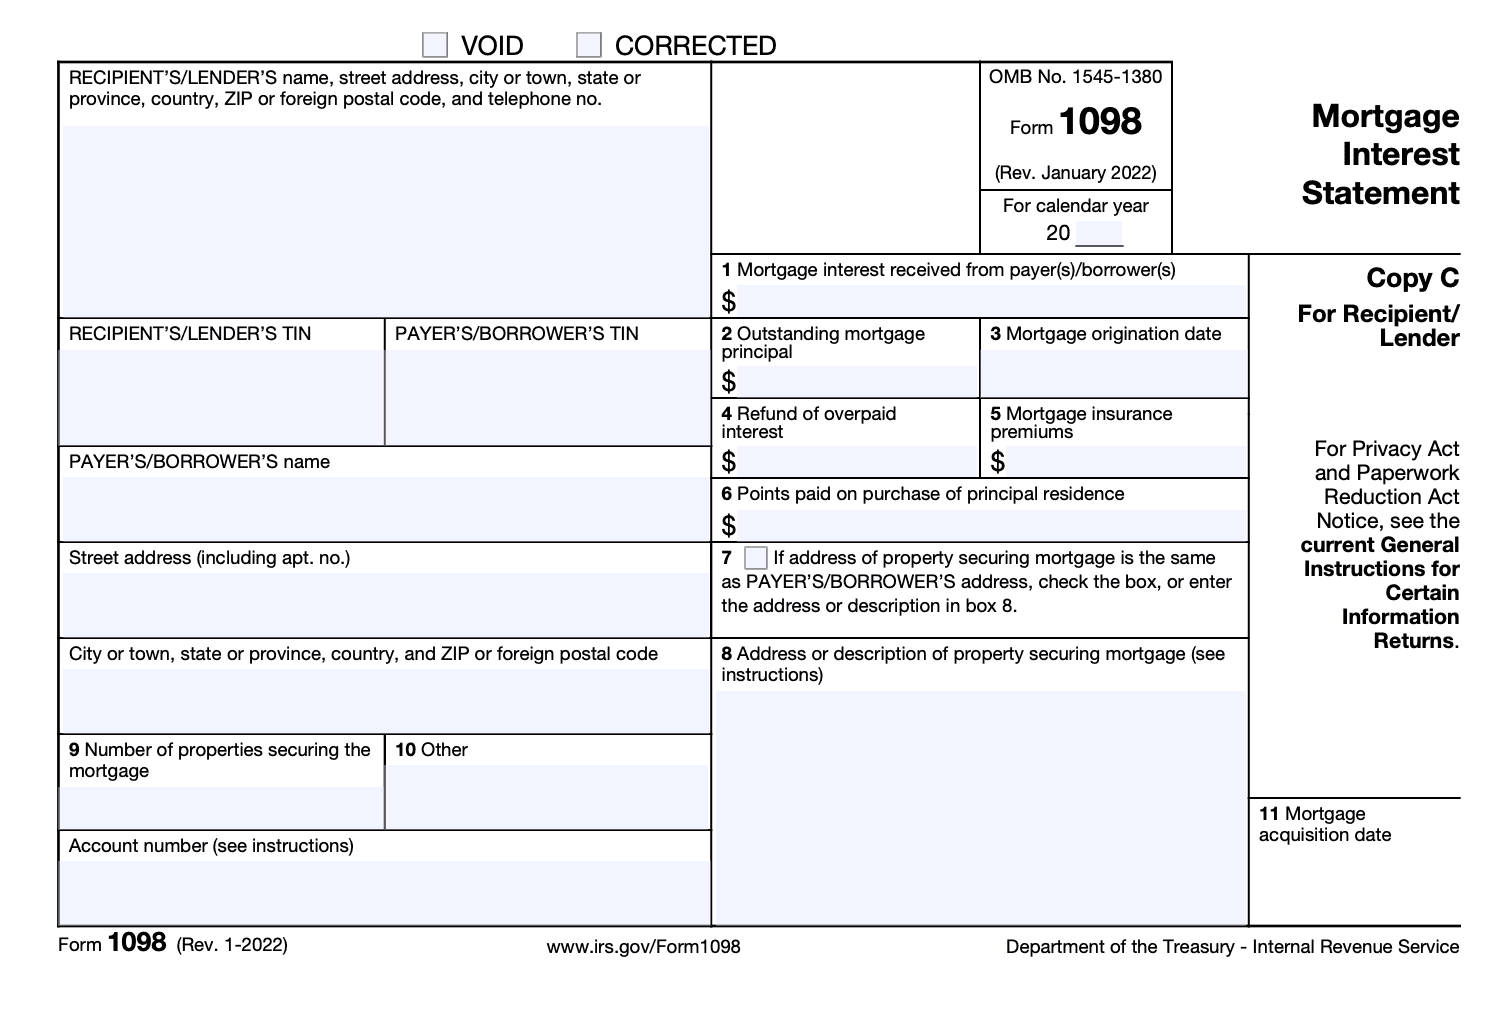 for-recipient-or-lender-form-1098.png